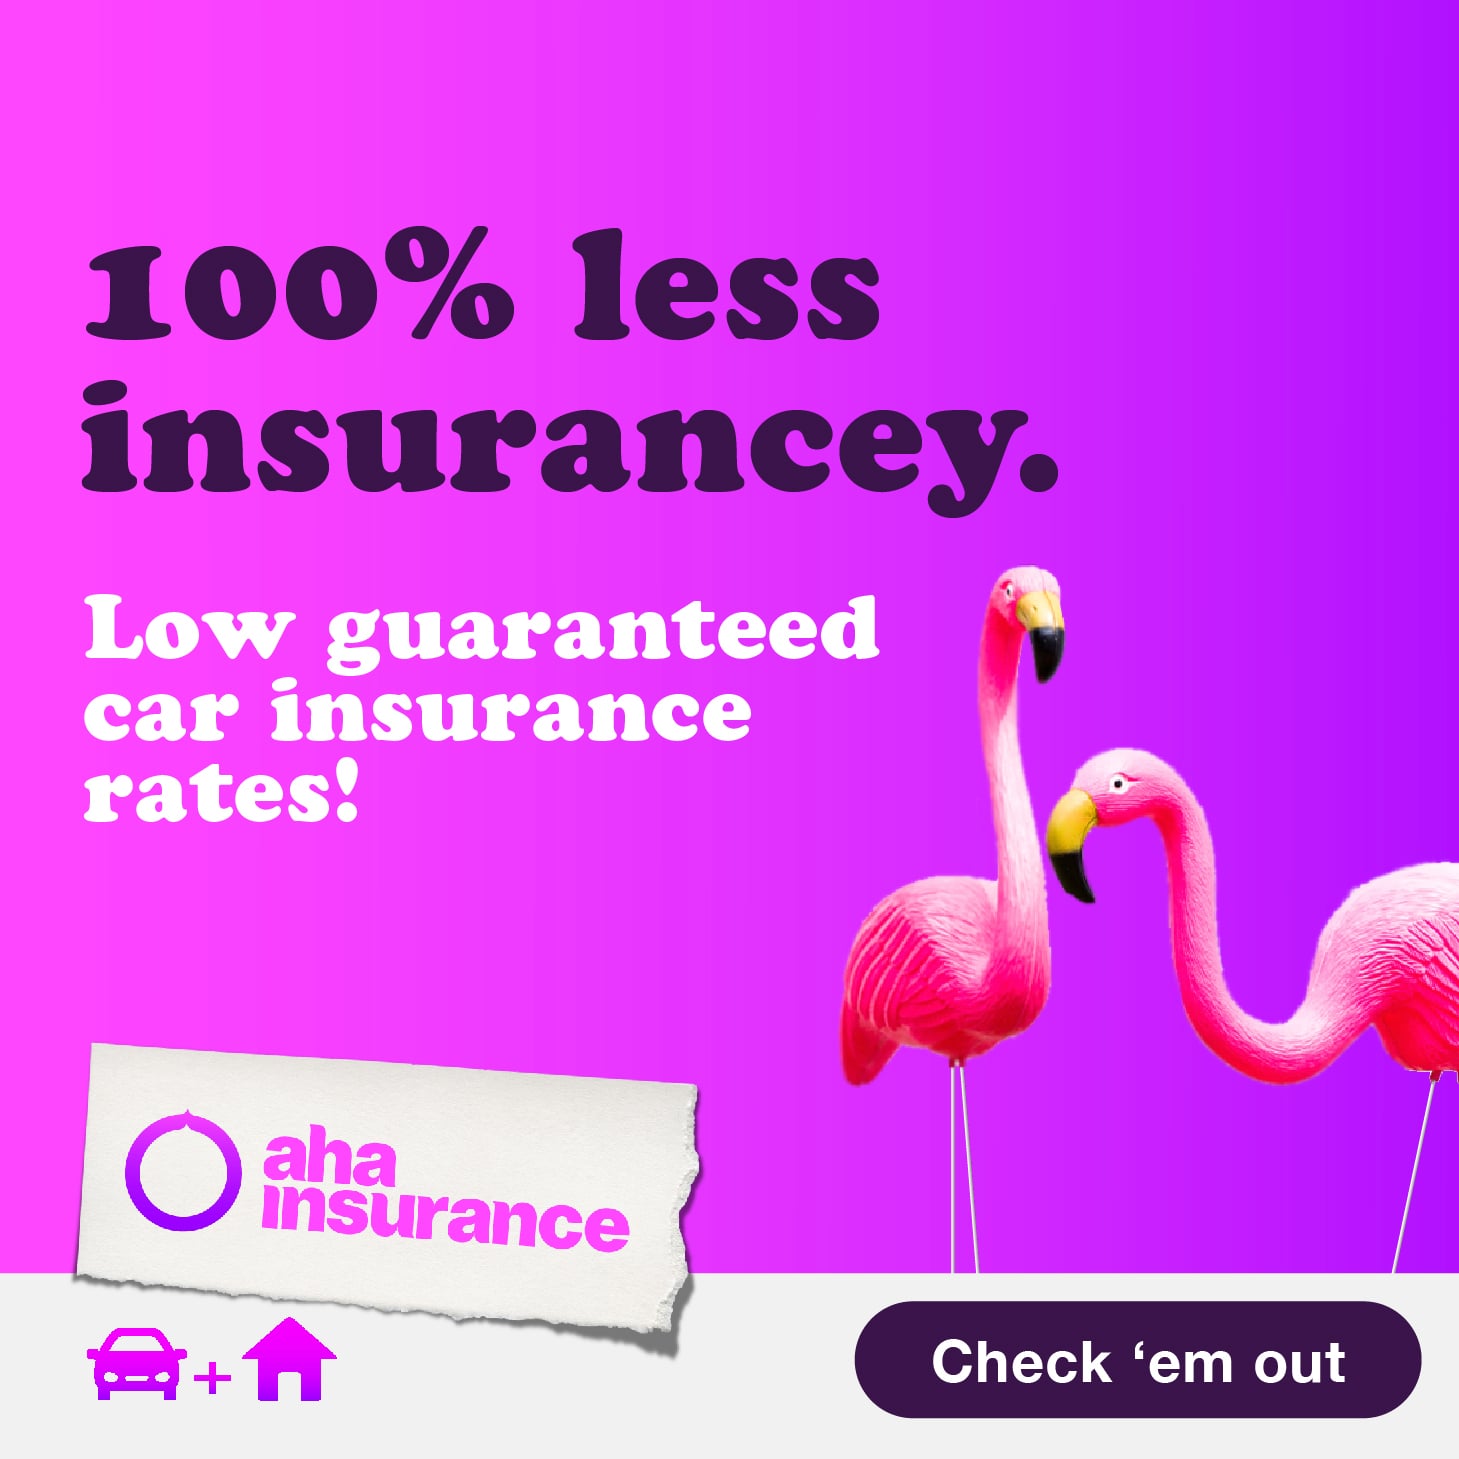 "100% less insurancey. Low guaranteed car insurance rates!" Beside an image of two pink lawn flamingos above the aha insurance logo.